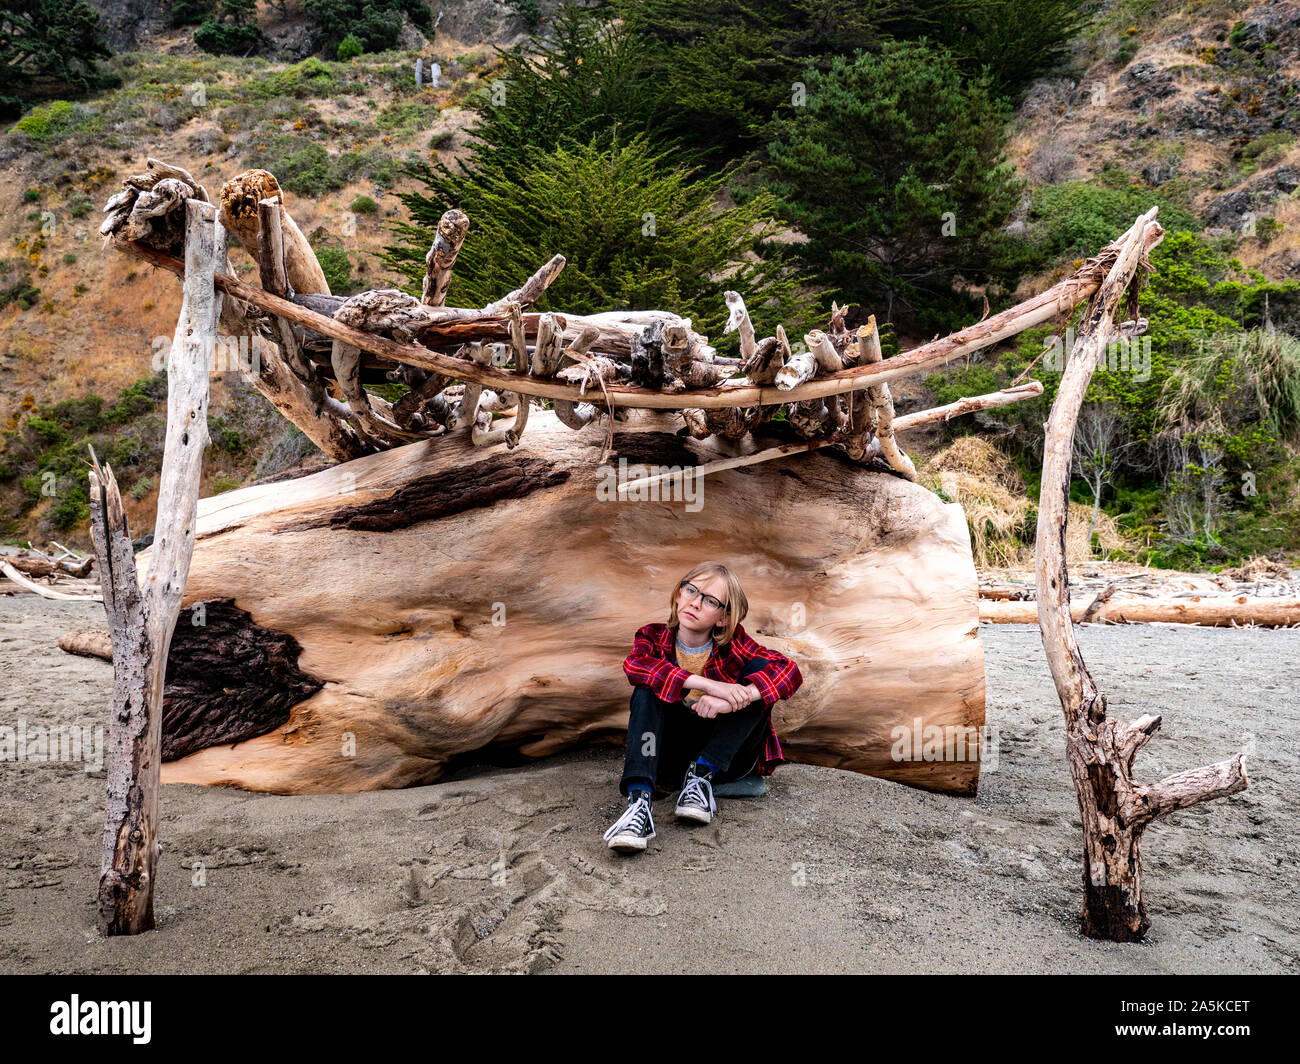 Tween boy sitting in driftwood structure at the beach Stock Photo